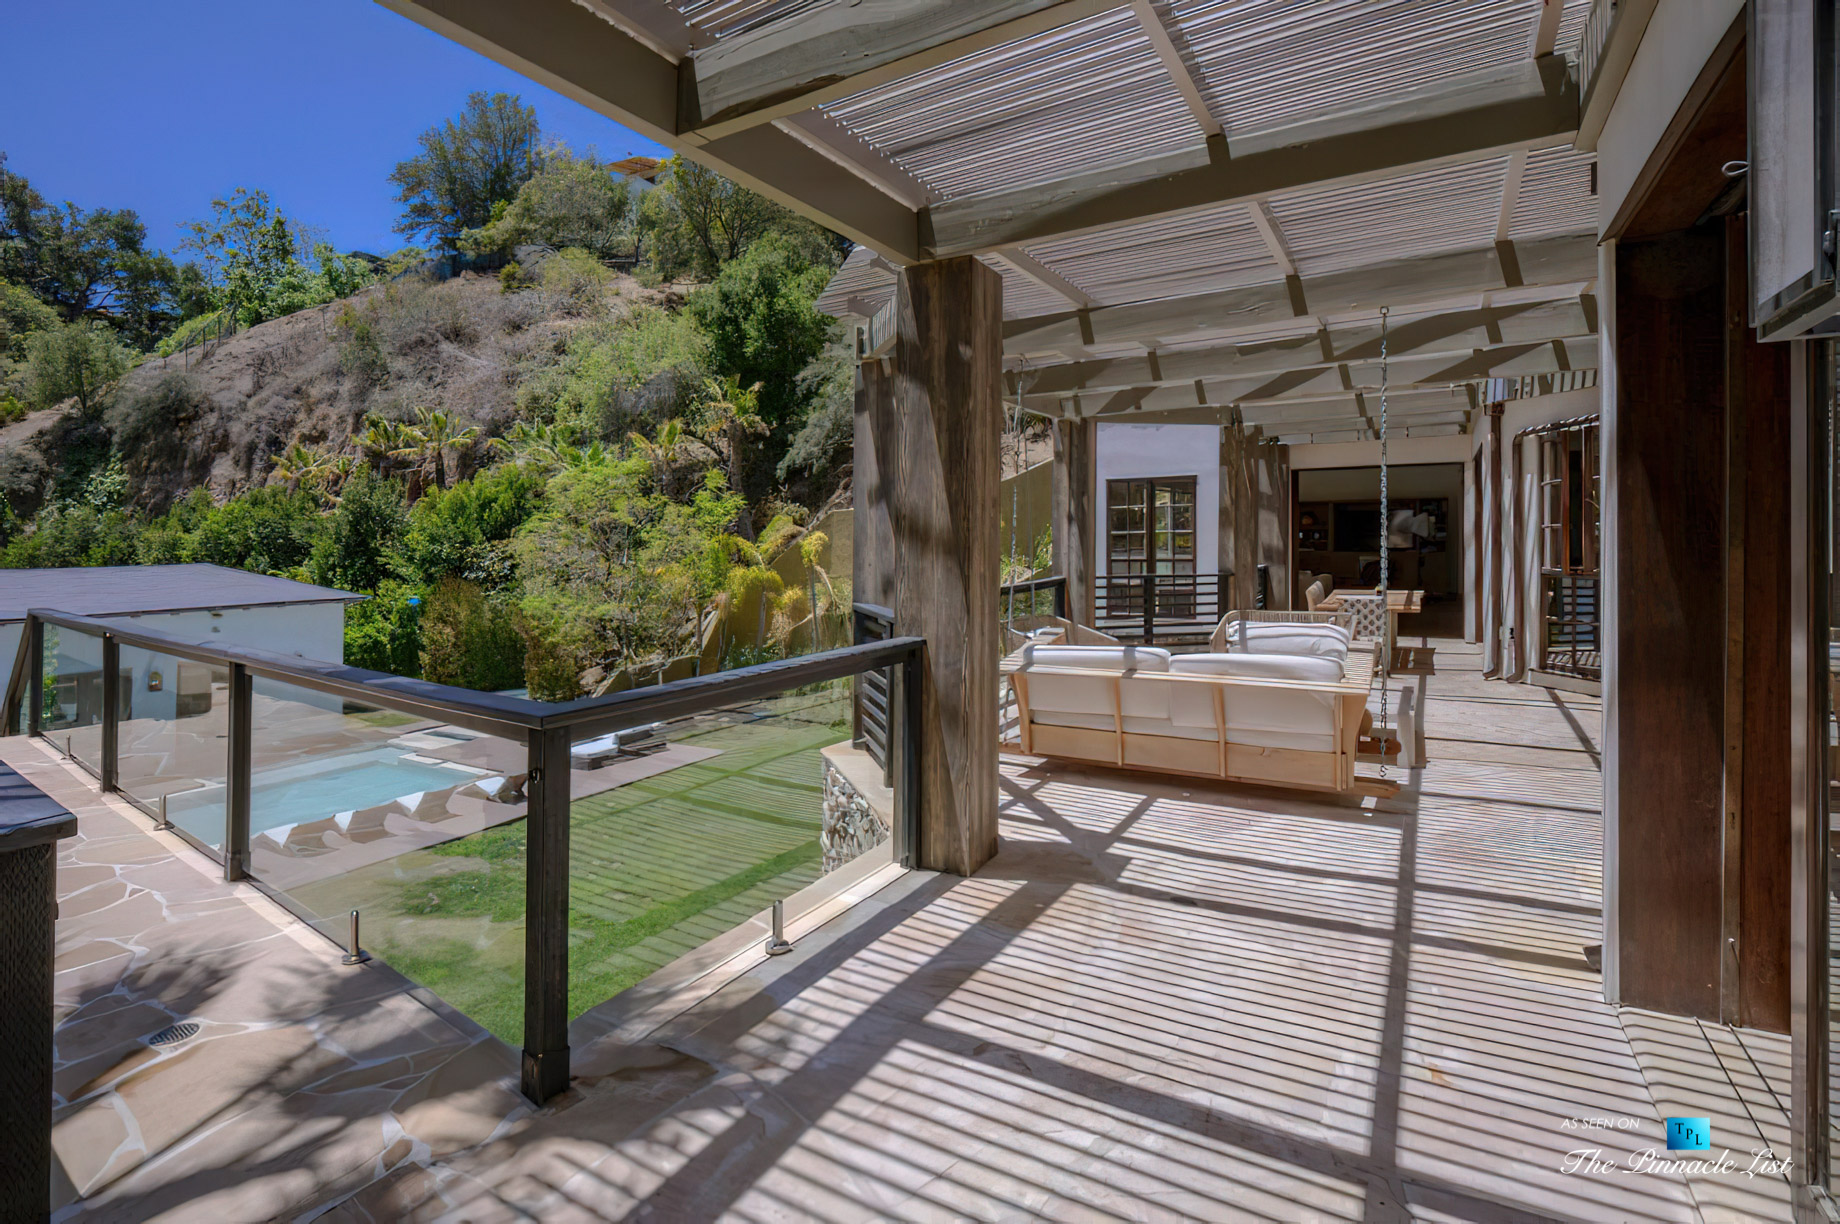 1105 Rivas Canyon Rd, Pacific Palisades, CA, USA - Luxury Real Estate - Exterior Deck